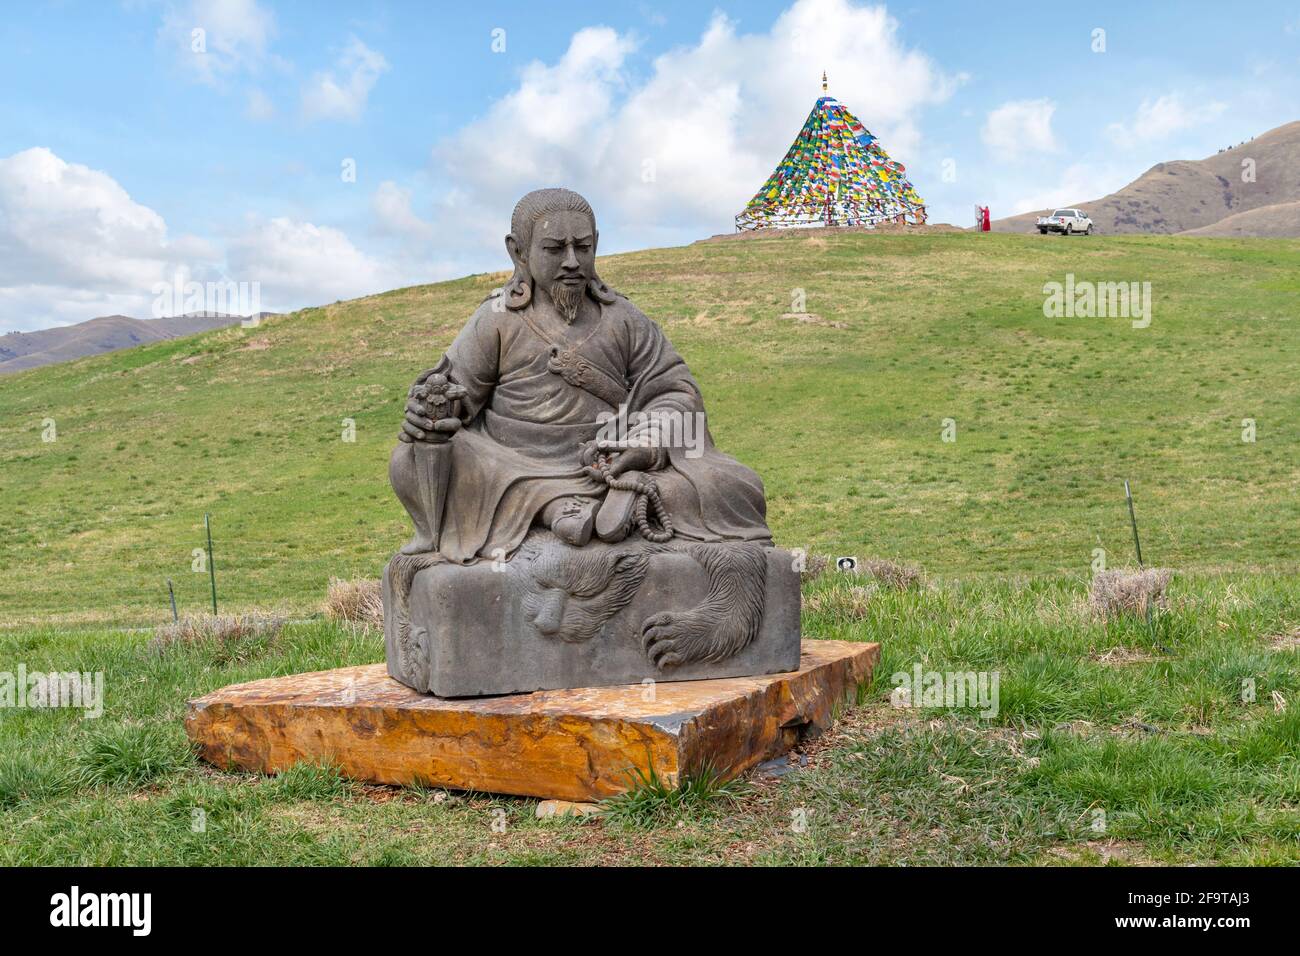 A Buddhist statue of a sitting warrior or king in the rural countryside of Montana, with a teepee made of flags blurred in the distance. Stock Photo